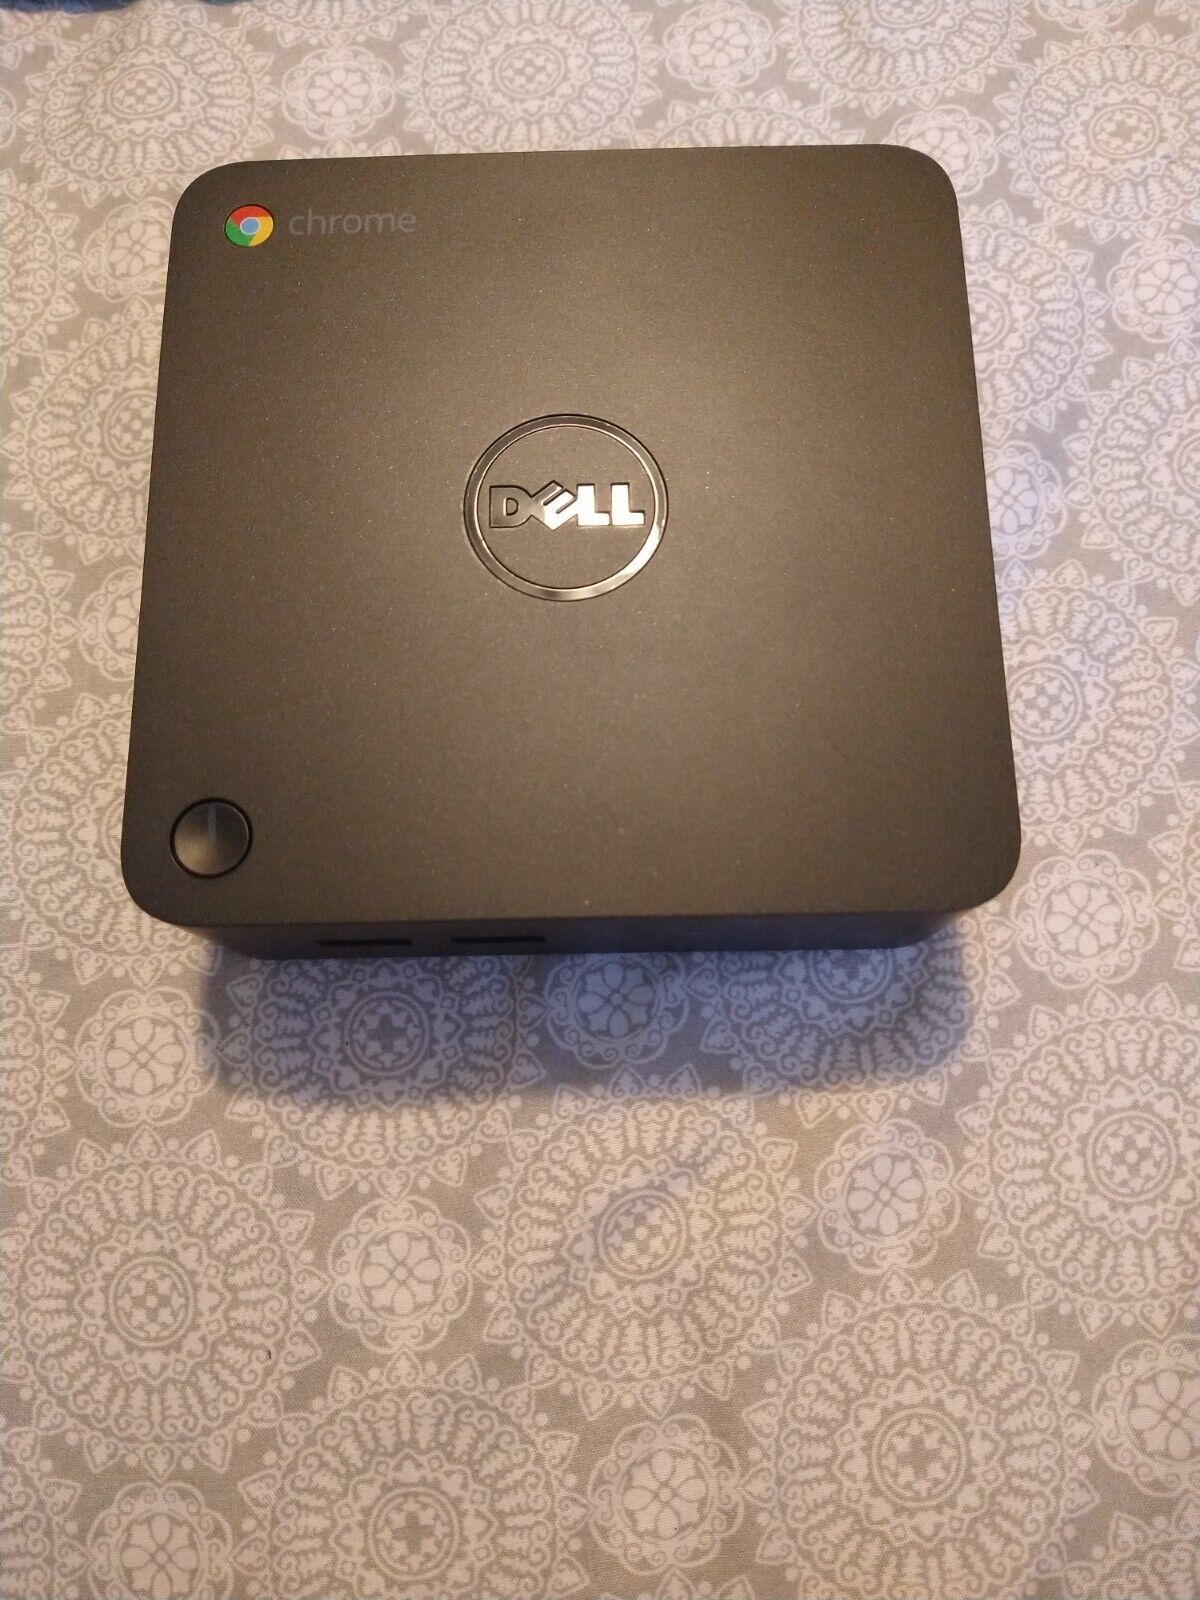 Dell Chromebox 3010 (2014) lightly used in perfect working condition